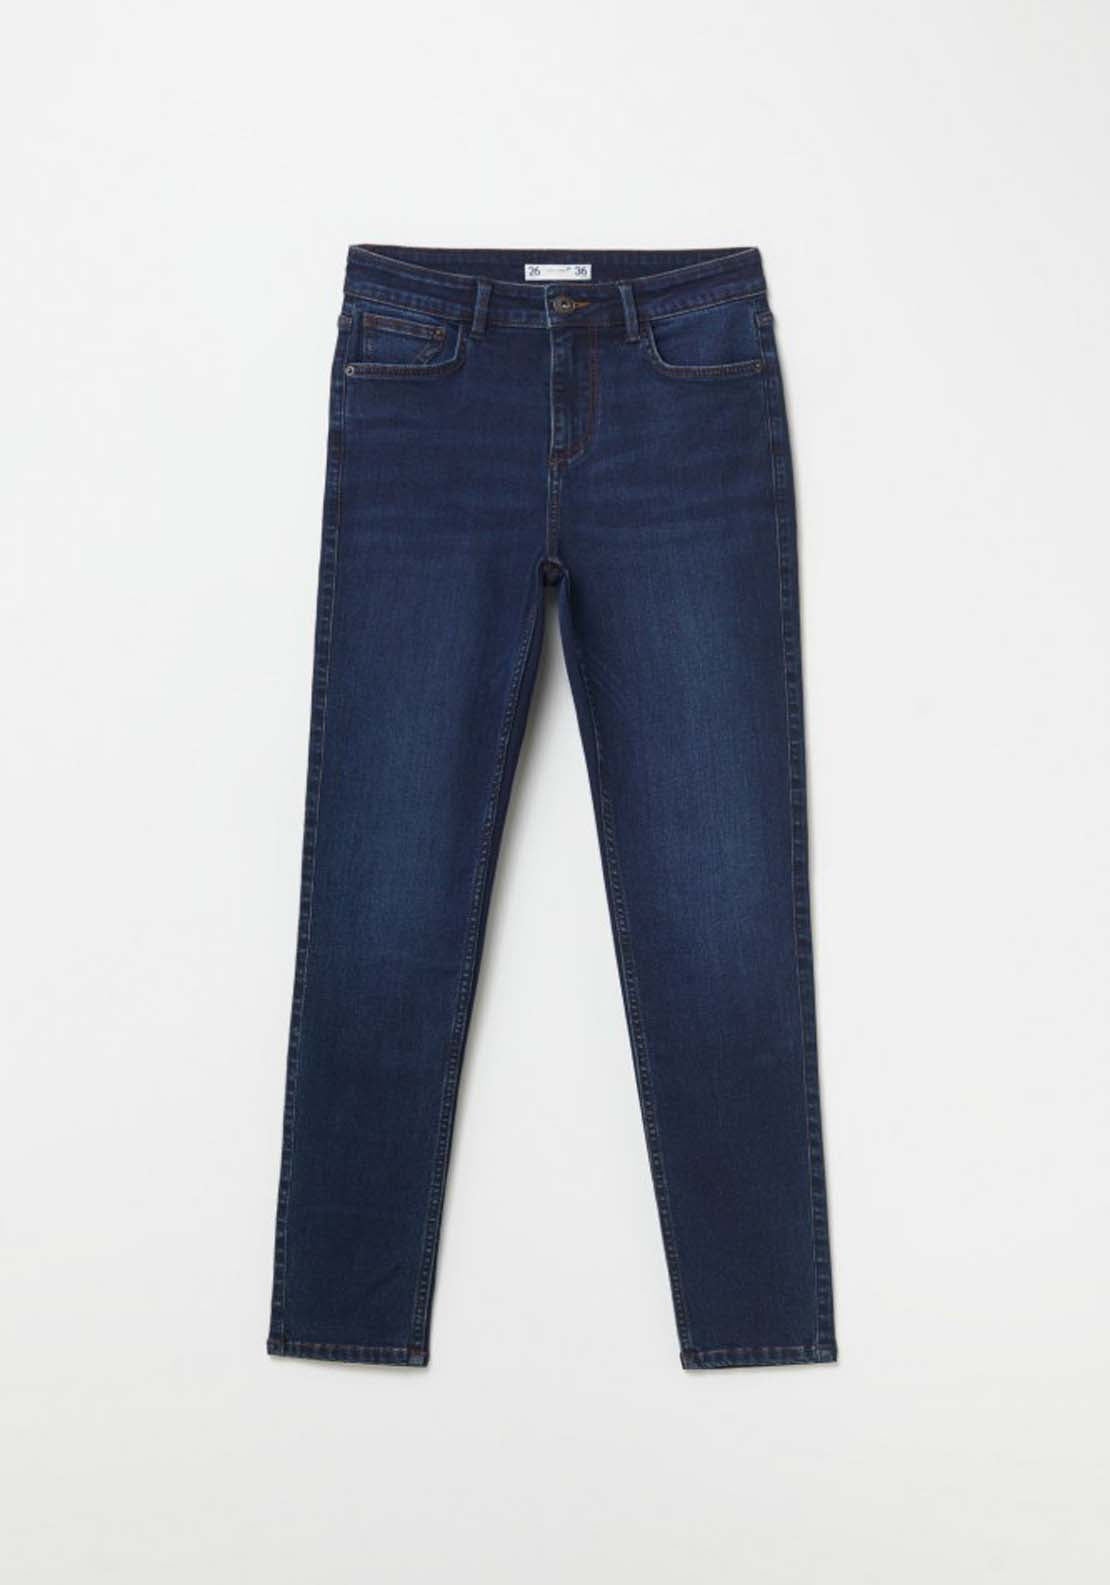 Sfera High-waist skinny jeans 6 Shaws Department Stores